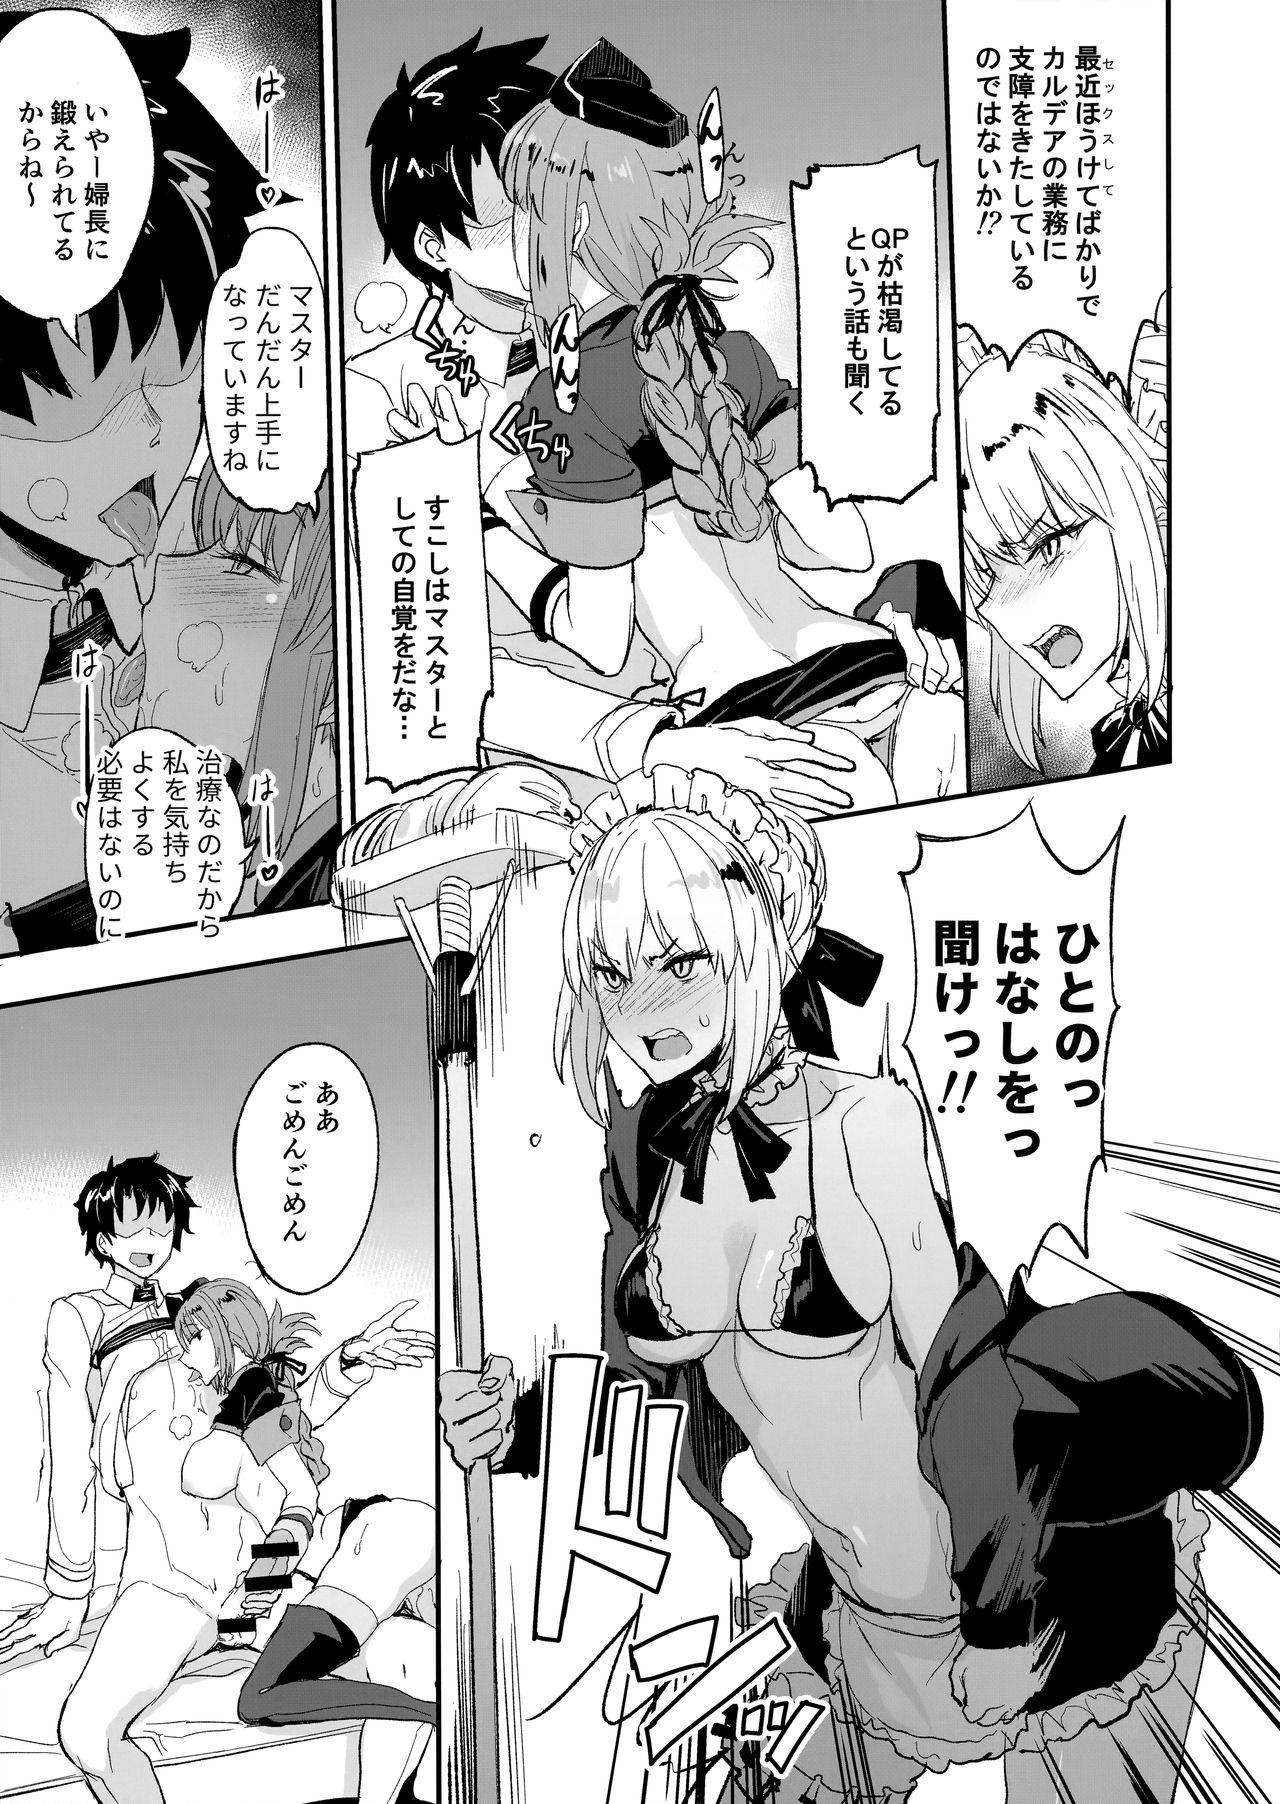 Stepsiblings FGO no Erohon 2 - Fate grand order Doggystyle Porn - Page 10